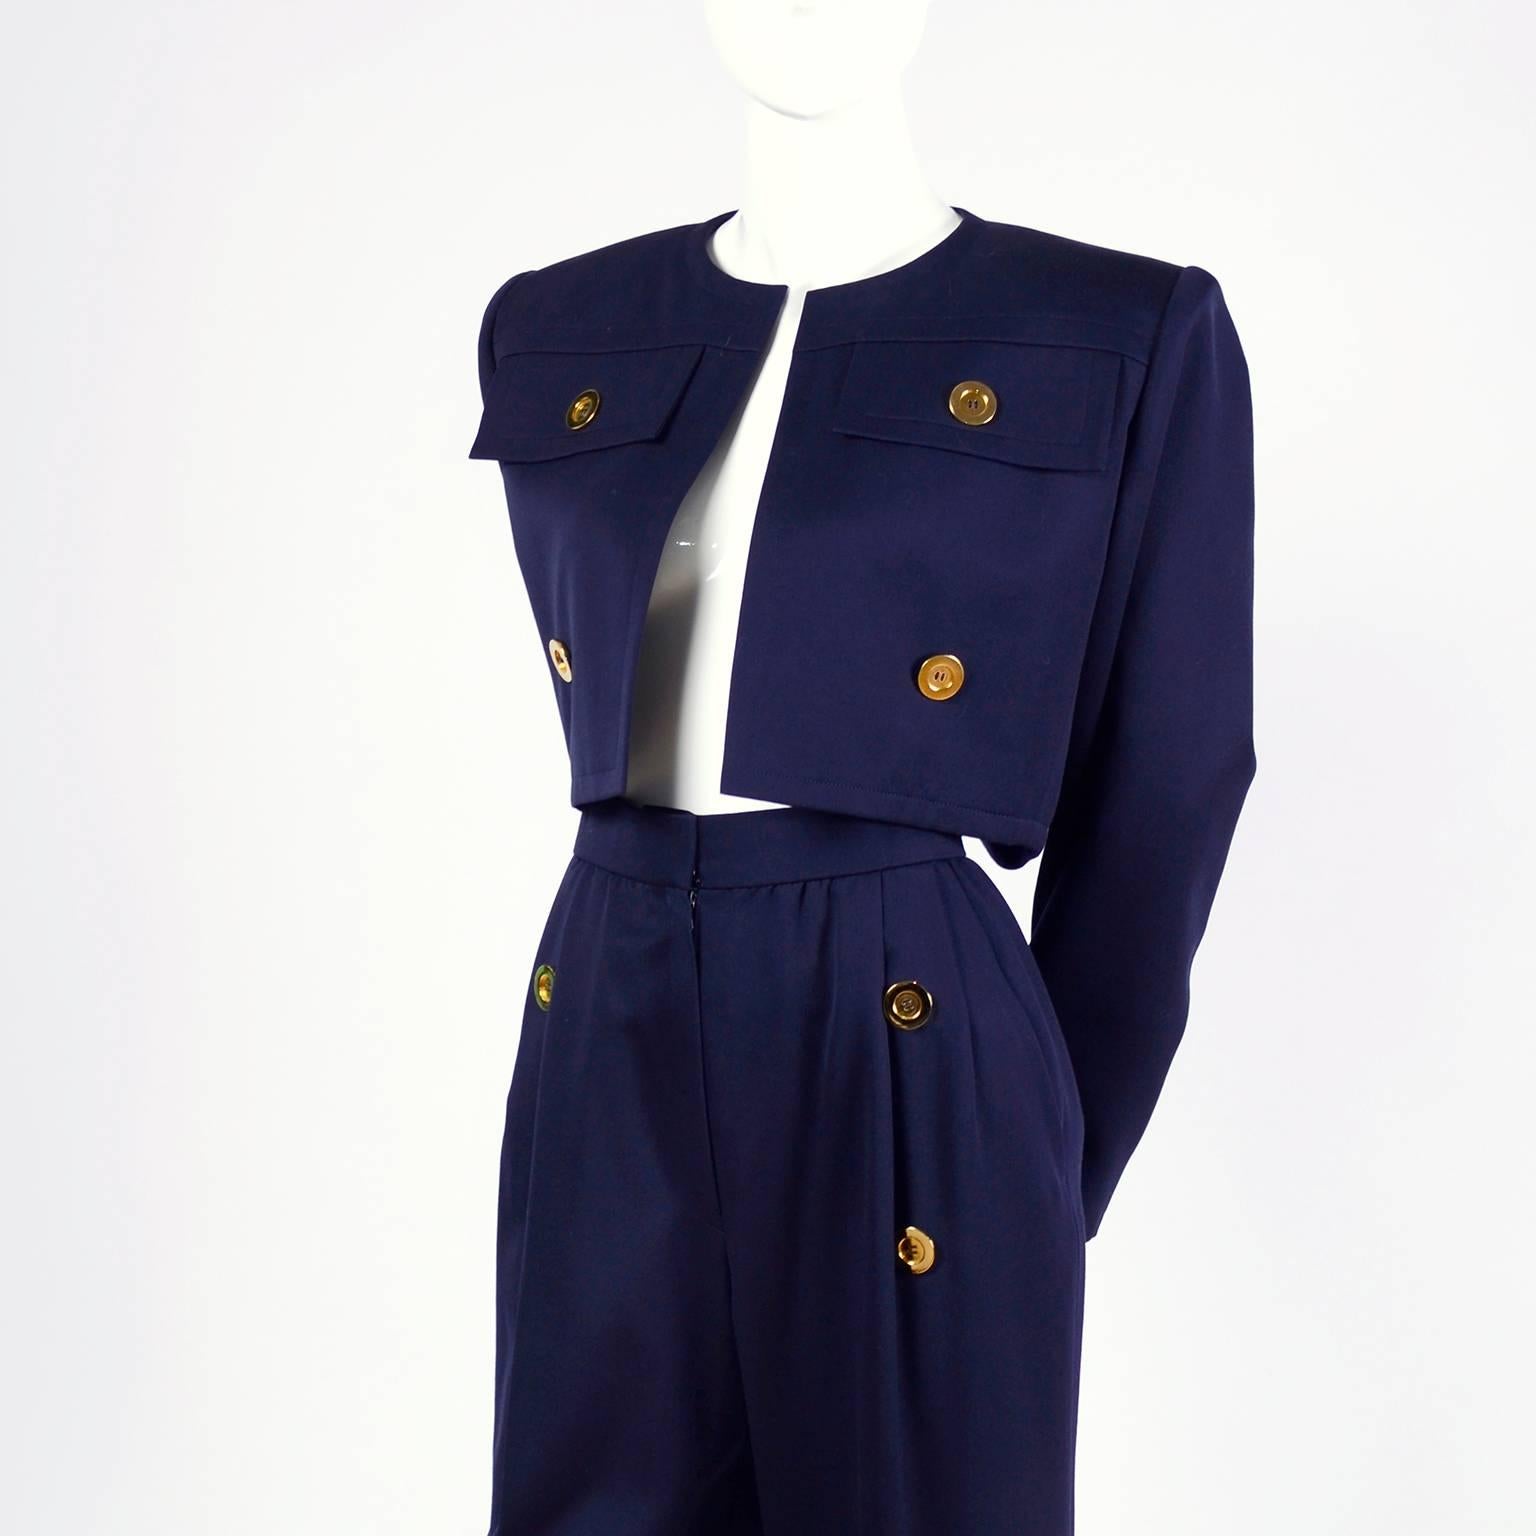 This midnight blue Givenchy pantsuit is from the 1980’s. The Givenchy Nouvelle Boutique suit is fully lined and features a pair of high waisted pants and a cropped jacket with shoulder pads. Both pieces have pretty gold buttons and the pants close